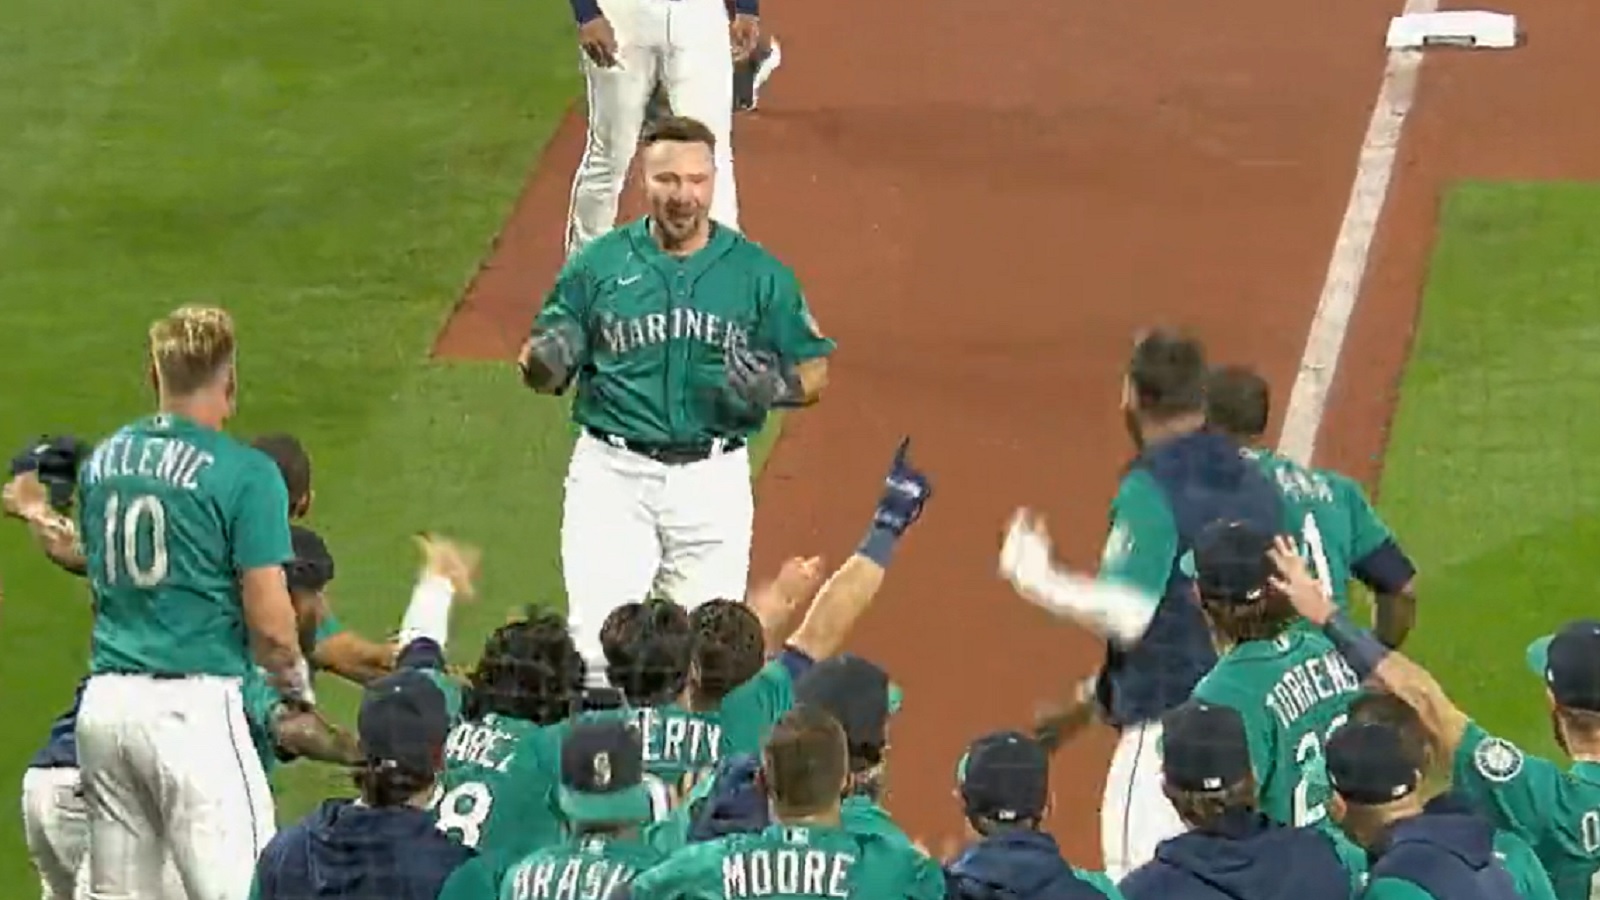 Walk-off home run sends Mariners to postseason for first time since 2001